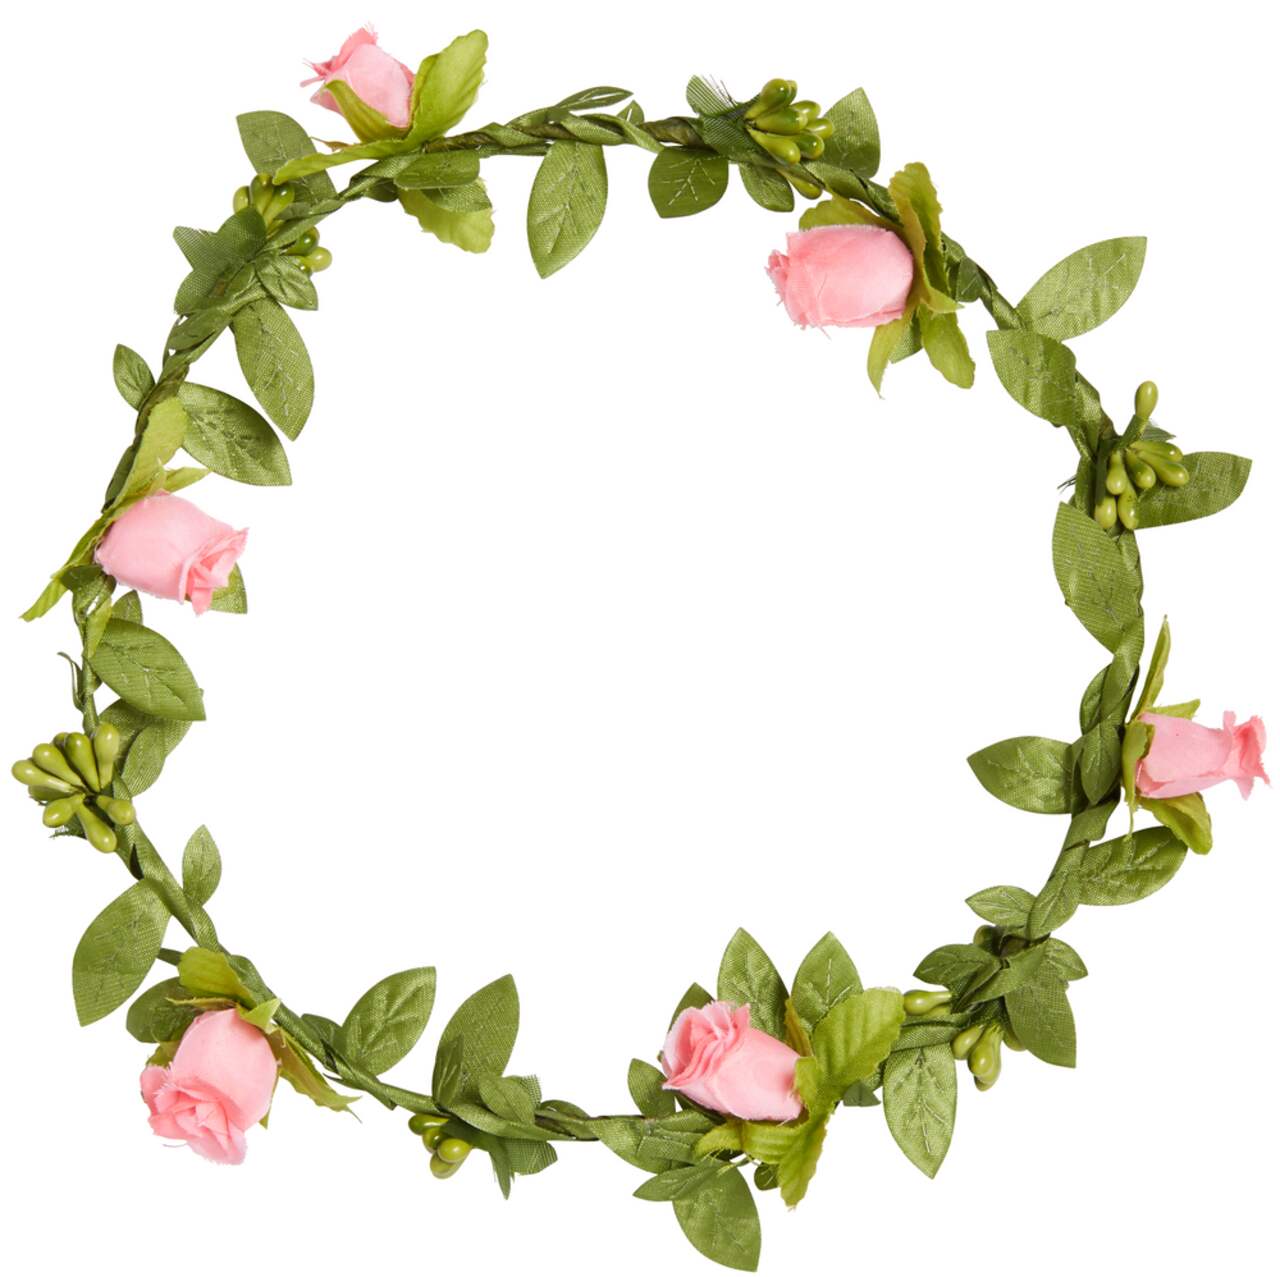 https://media-www.canadiantire.ca/product/seasonal-gardening/party-city-everyday/party-city-party-supplies-decor/8423812/16in-head-wreath-flwr-mint-be-d4101966-8821-47f7-b627-fbe1042ac92a.png?imdensity=1&imwidth=640&impolicy=mZoom